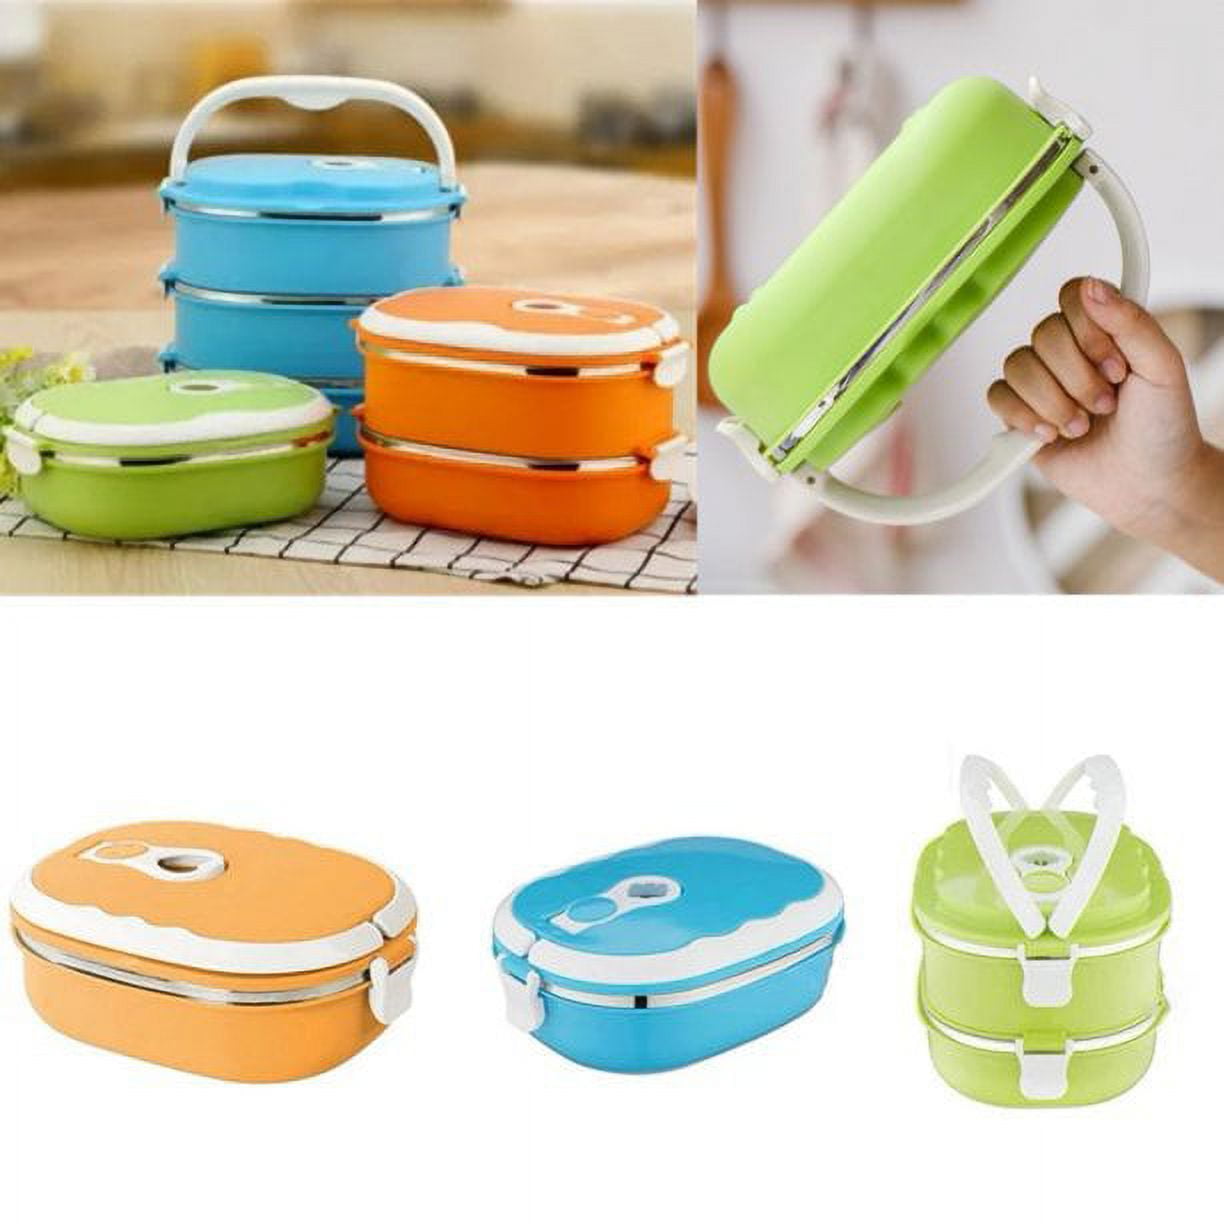 Lnkoo Portable Food Warmer School Lunch Box Bento Thermal Insulated Food Container 1 Layer Stainless Steel Insulated Square Lunch Box for Children